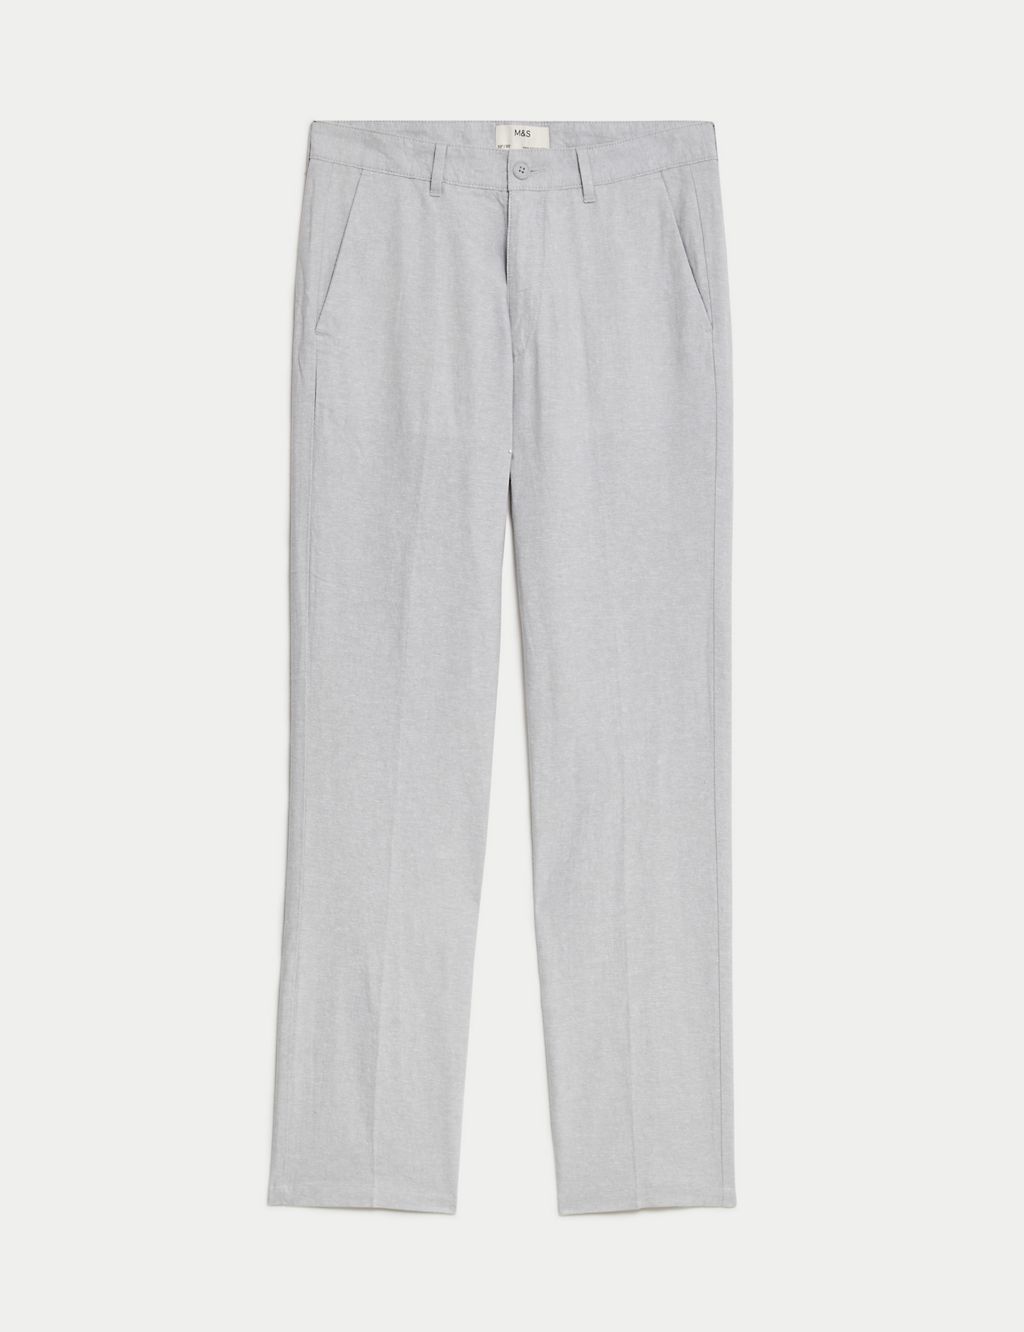 Regular Fit Linen Blend Chambray Stretch Chinos 1 of 6